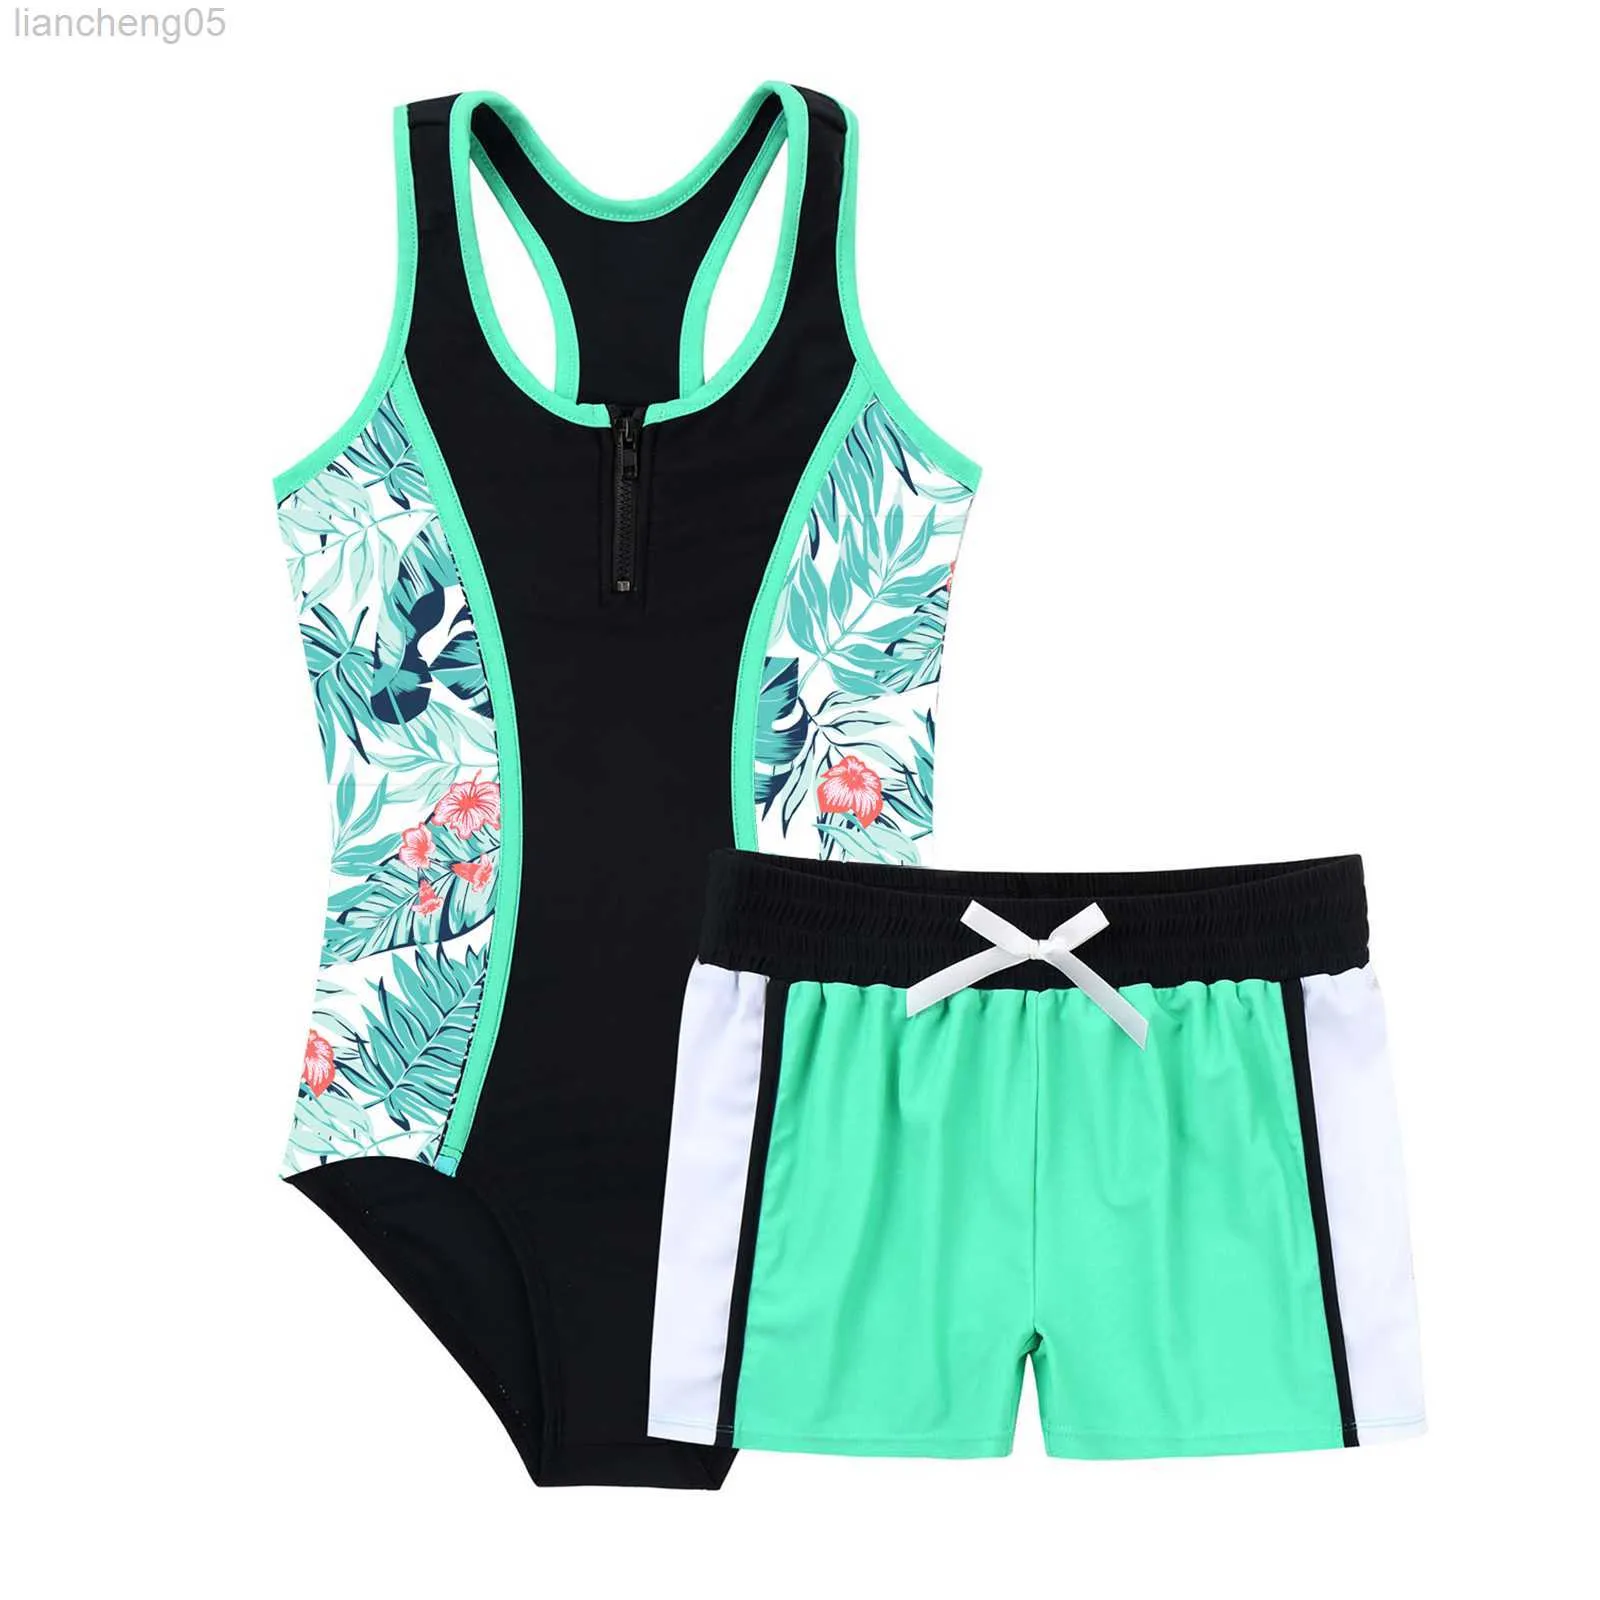 One-Pieces Kids Children Girls Swimsuit Swimwear Outfits Floral Printed Bodysuit Swimsuit Swimwear Bathing Suit Set with Bottoms Shorts W0310